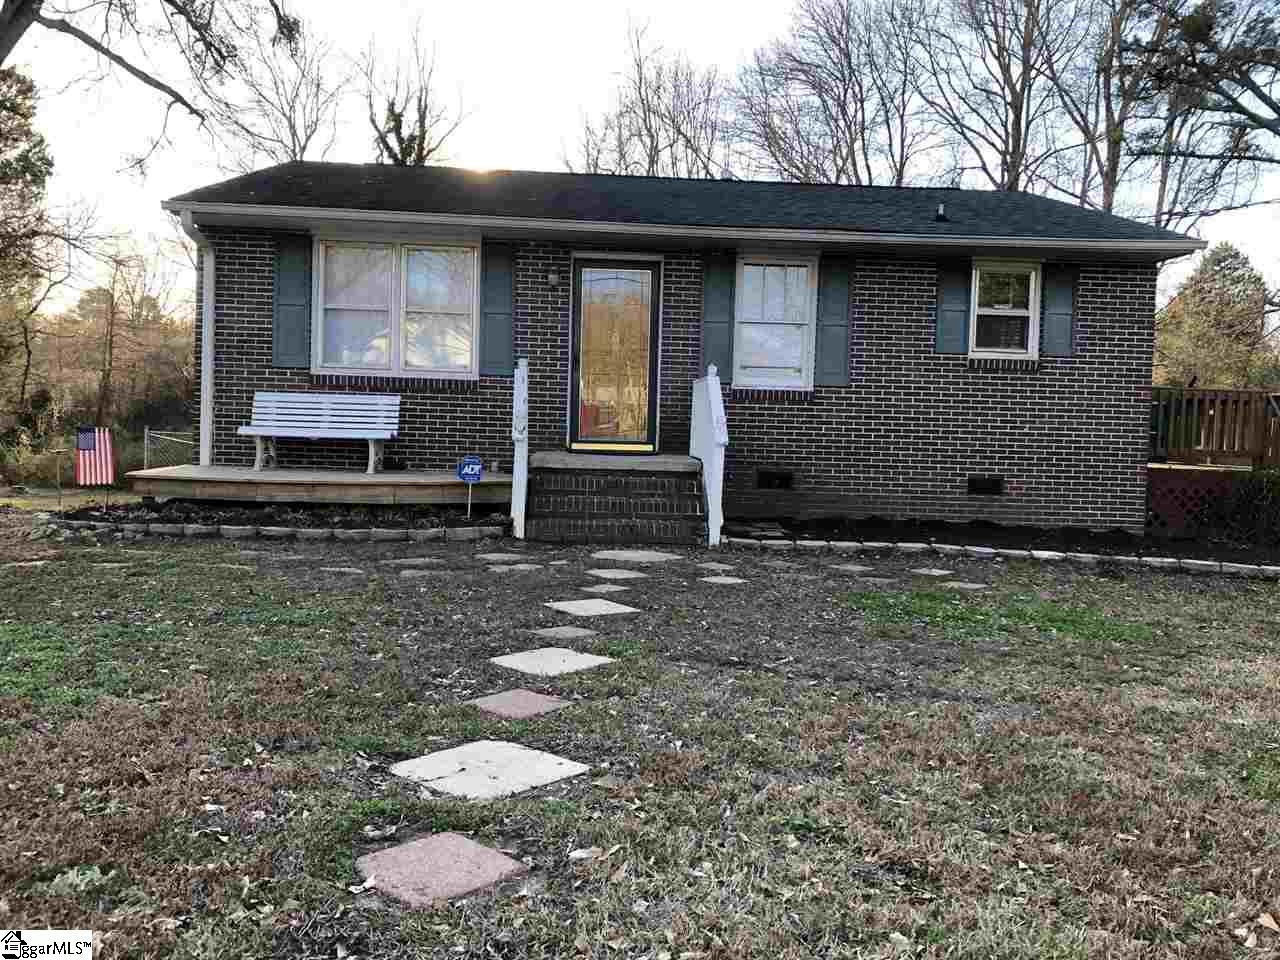 Great well maintained 2 bedroom 1 bath brick home located in Belton. Home has hardwood & vinyl floors in great shape. Home is for sale as is.